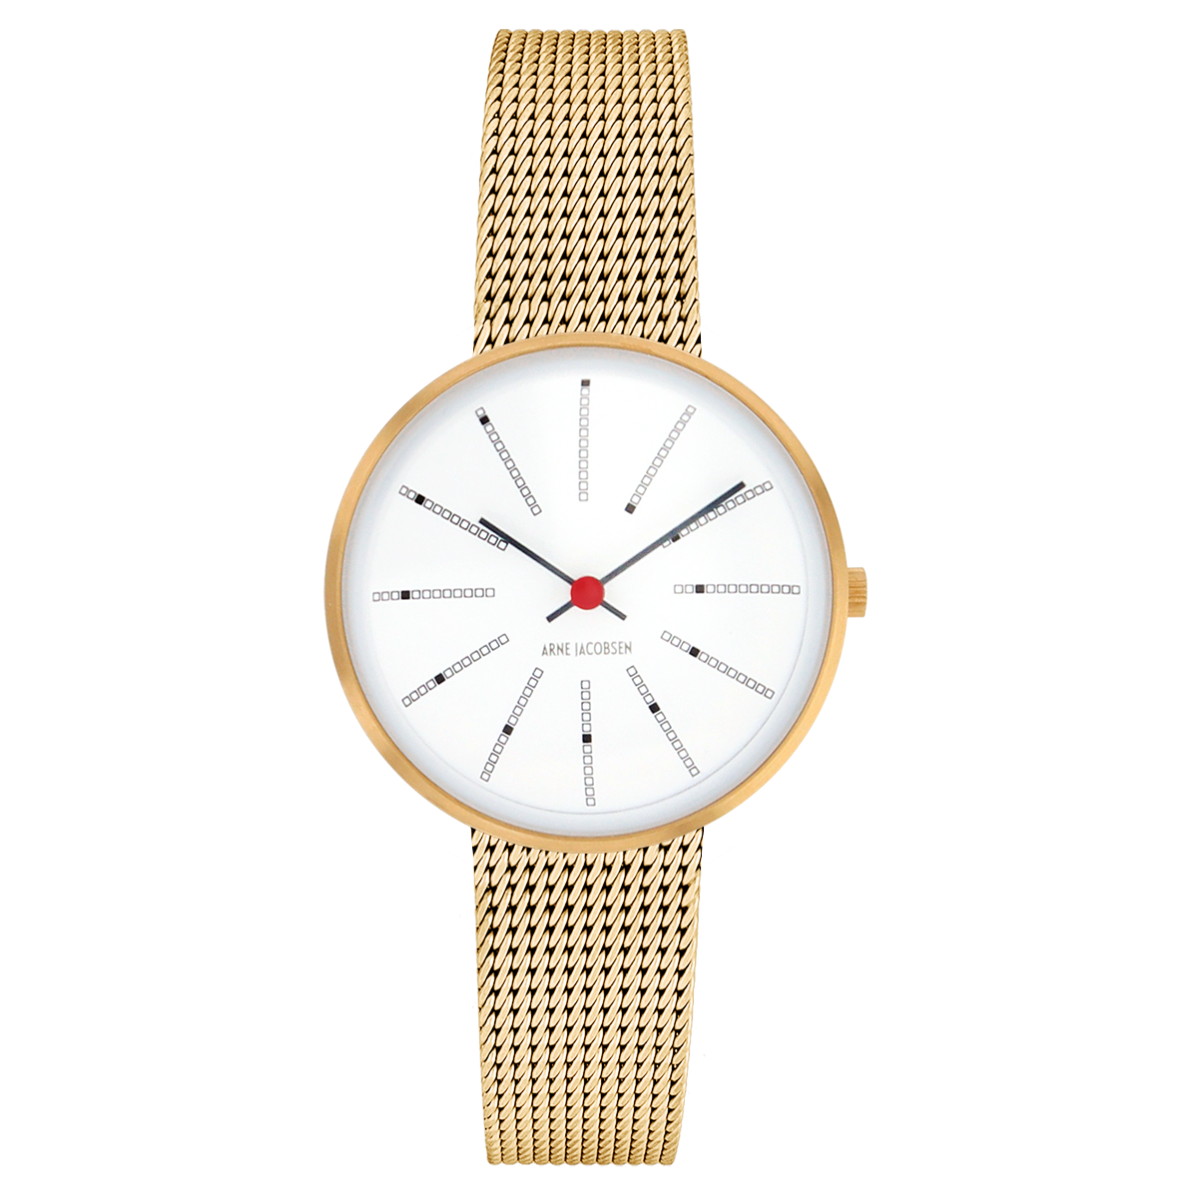 Bankers watch - Ø30mm - Gold/white, mesh band